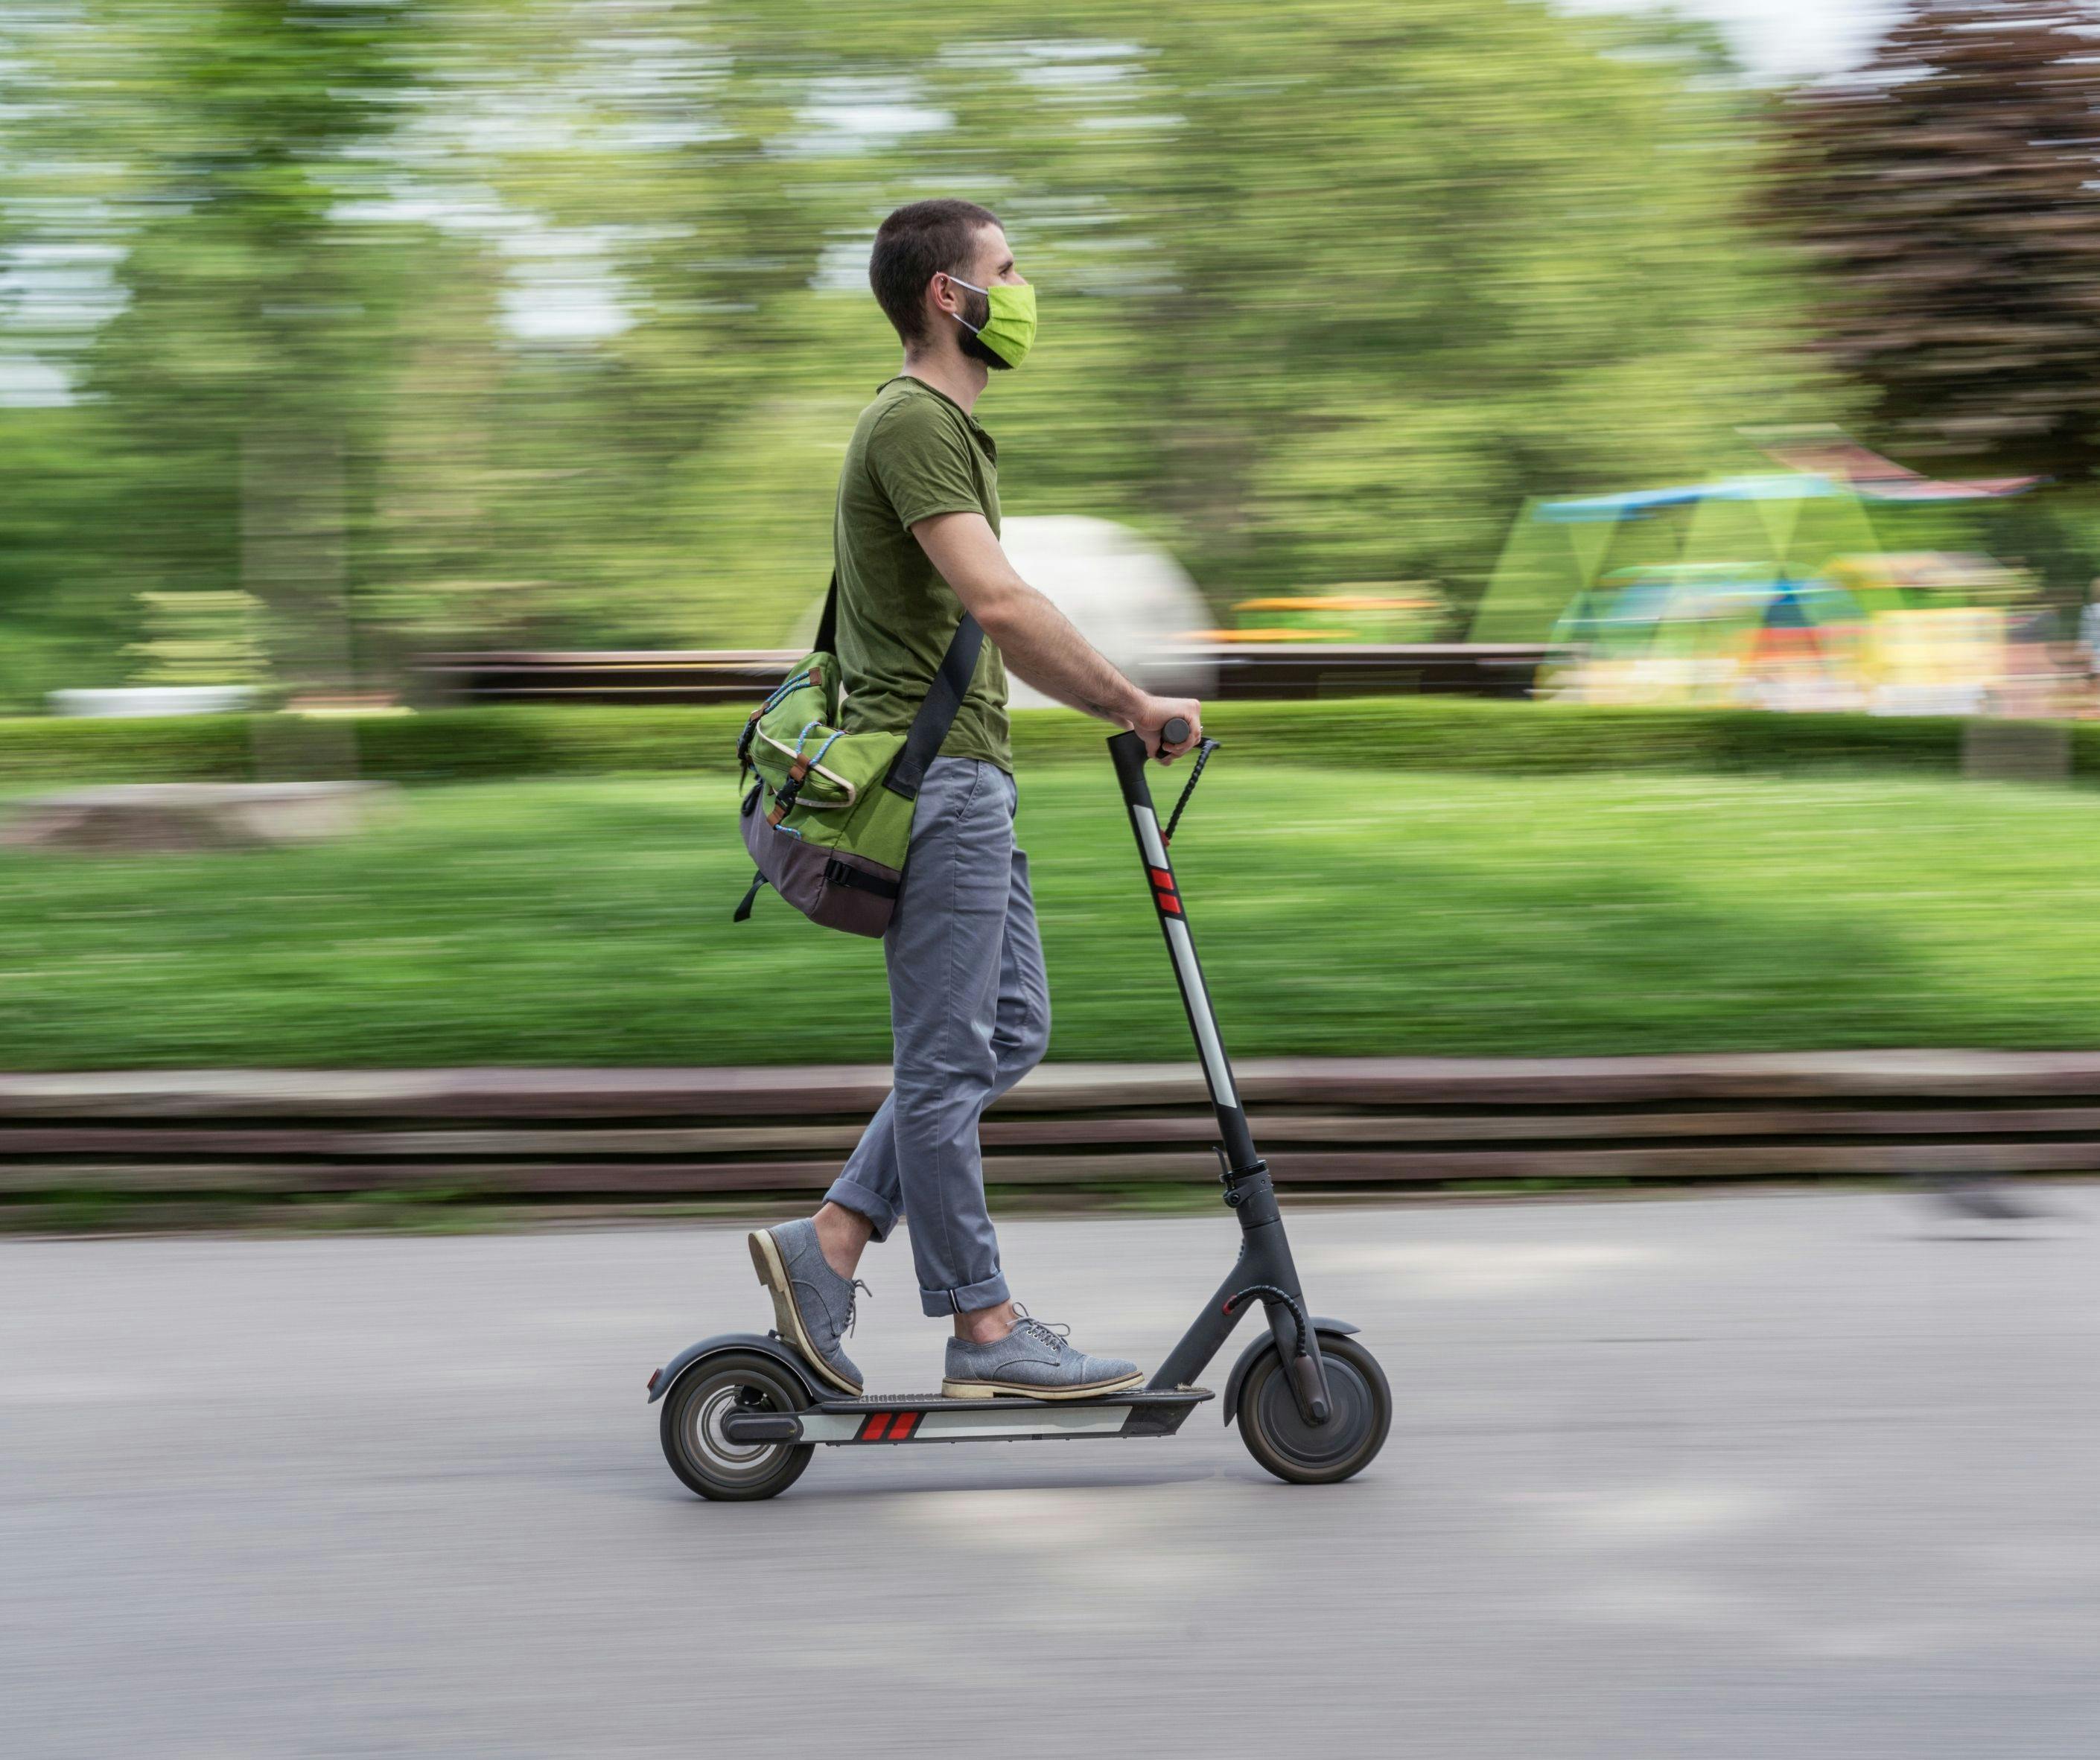 Using an e-scooter in a park setting